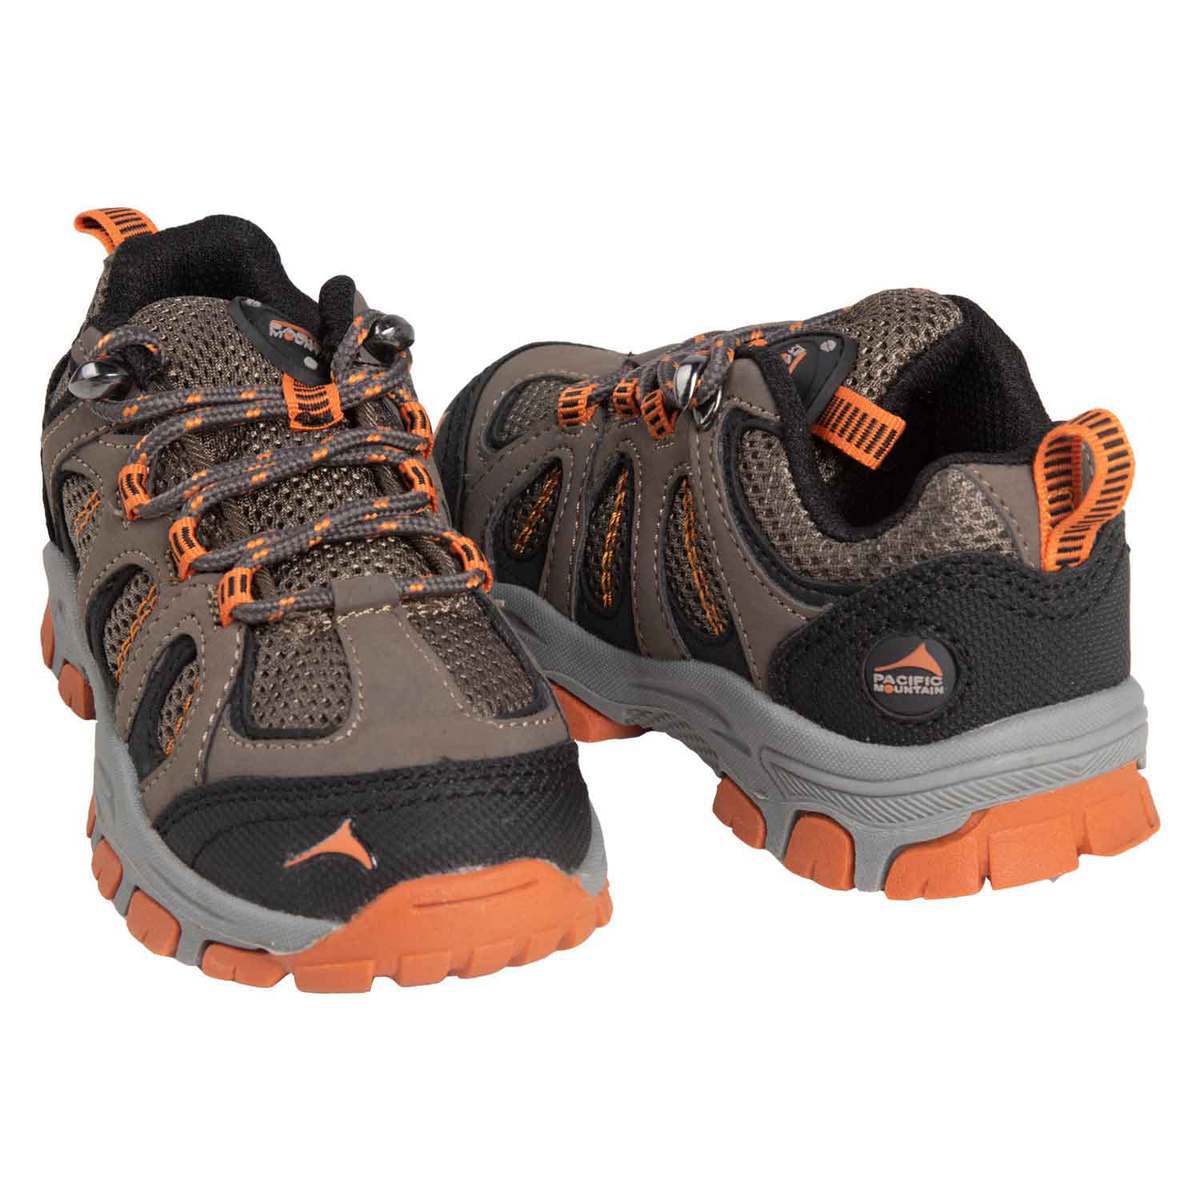 Pacific Mountain Youth Crestone Jr Hiking Boots | Sportsman's Warehouse